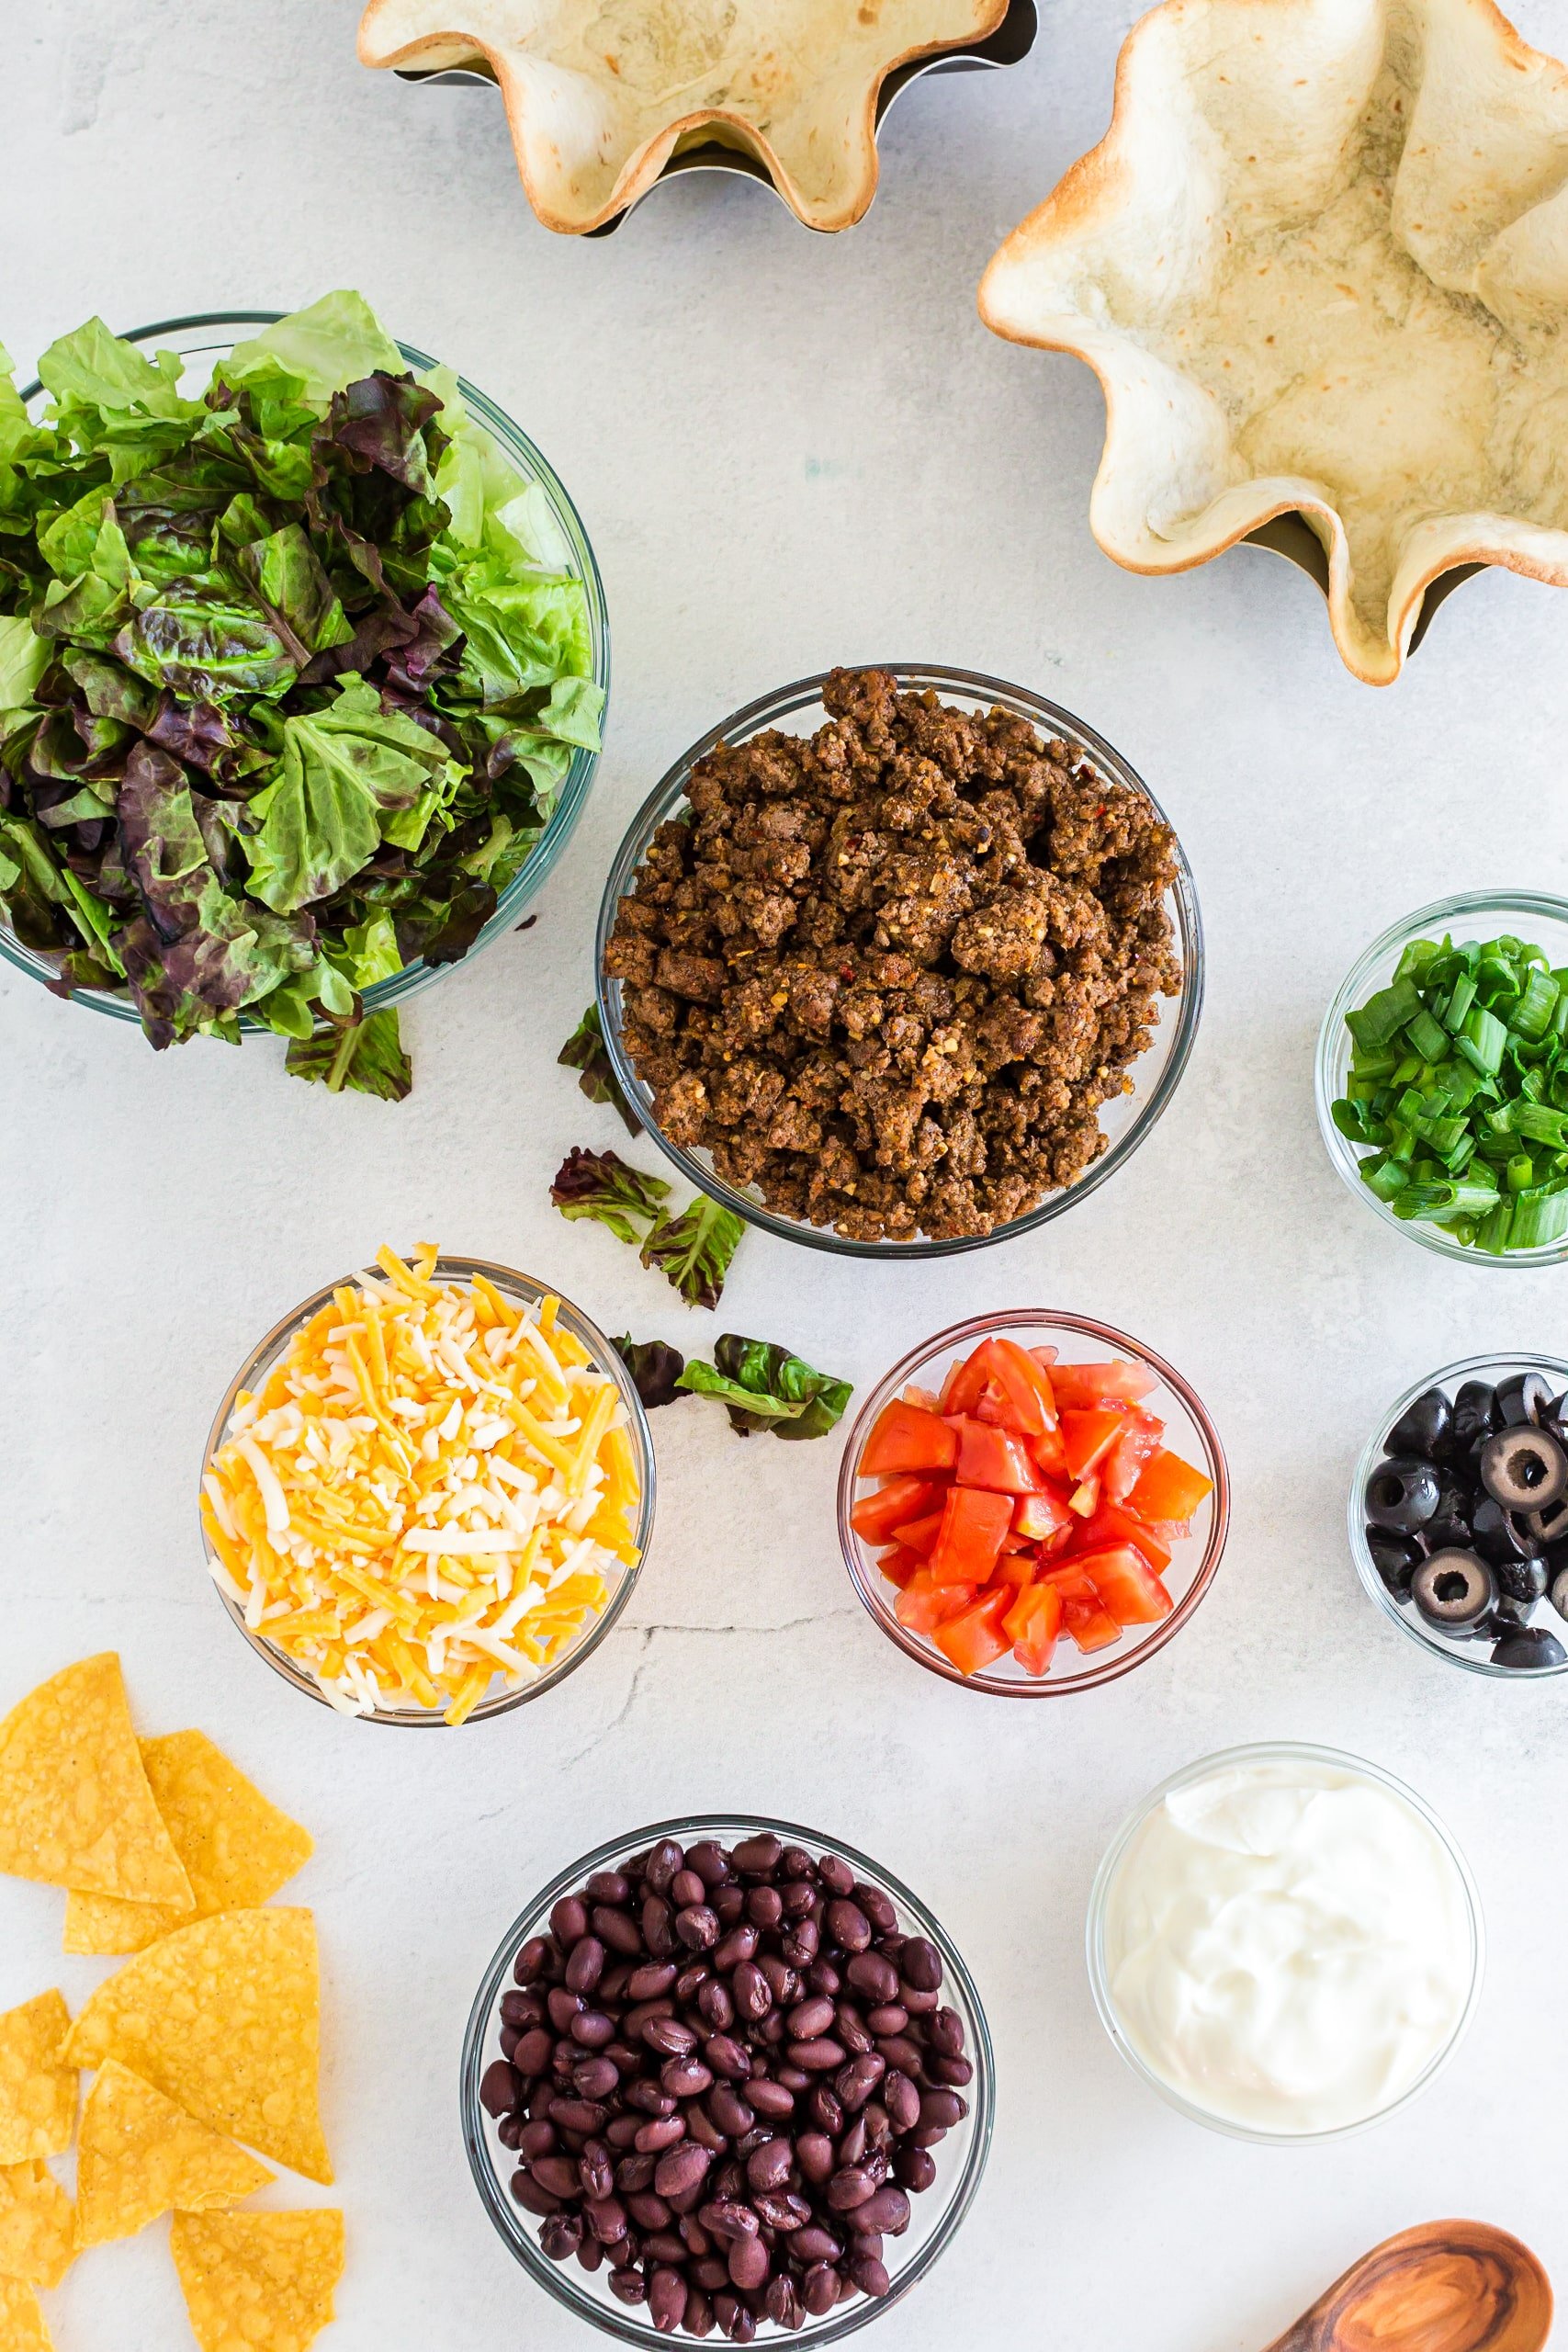 individual ingredients for taco salad bowls set out like lettuce, taco meat, cheese, diced tomatoes, etc.